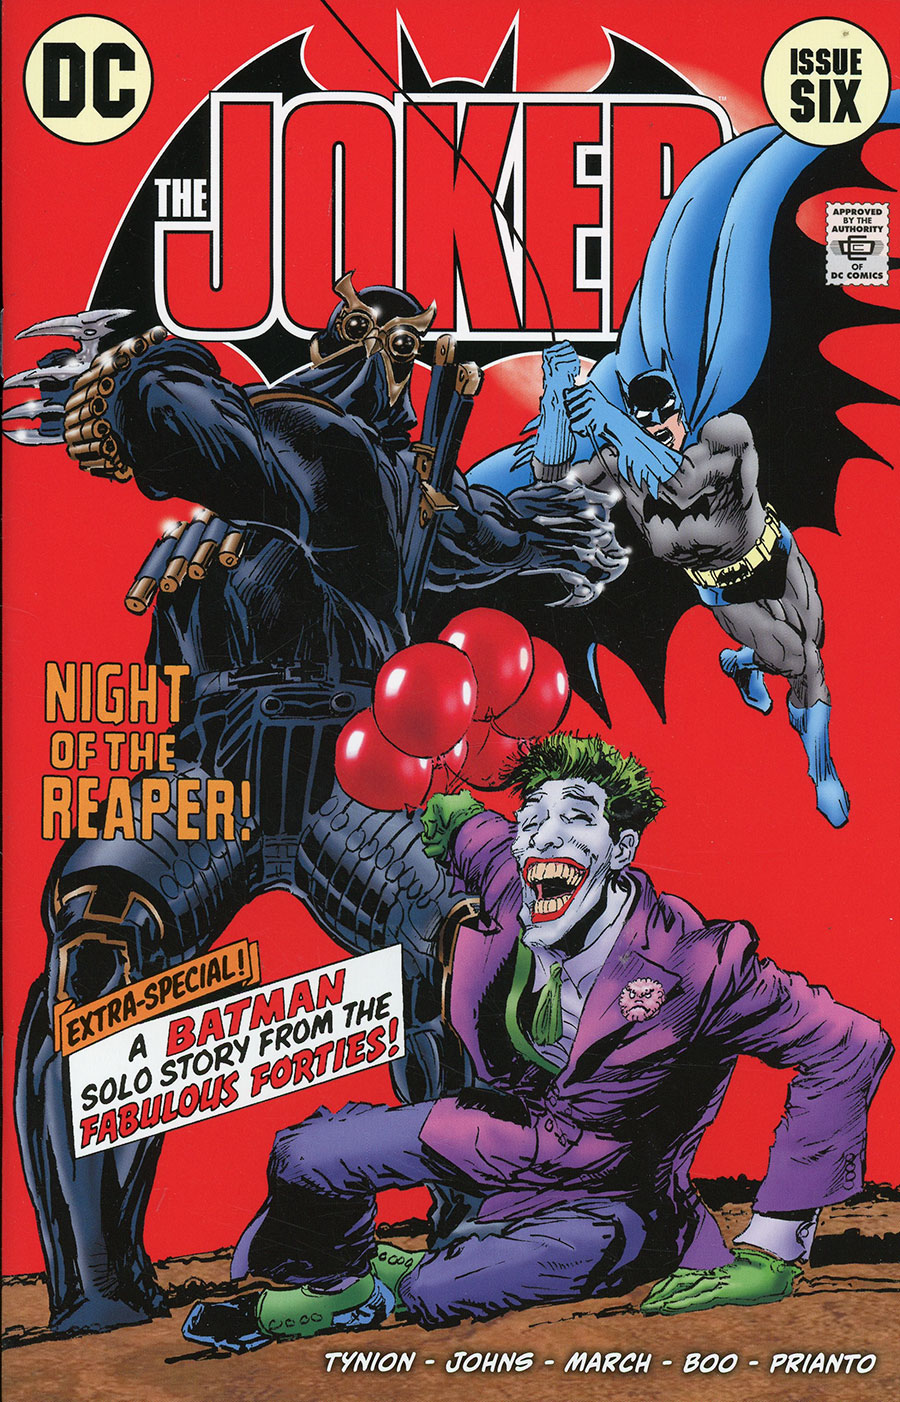 Joker Vol 2 #6 Cover F State Of Comics & Collectables Exclusive Neal Adams Variant Cover